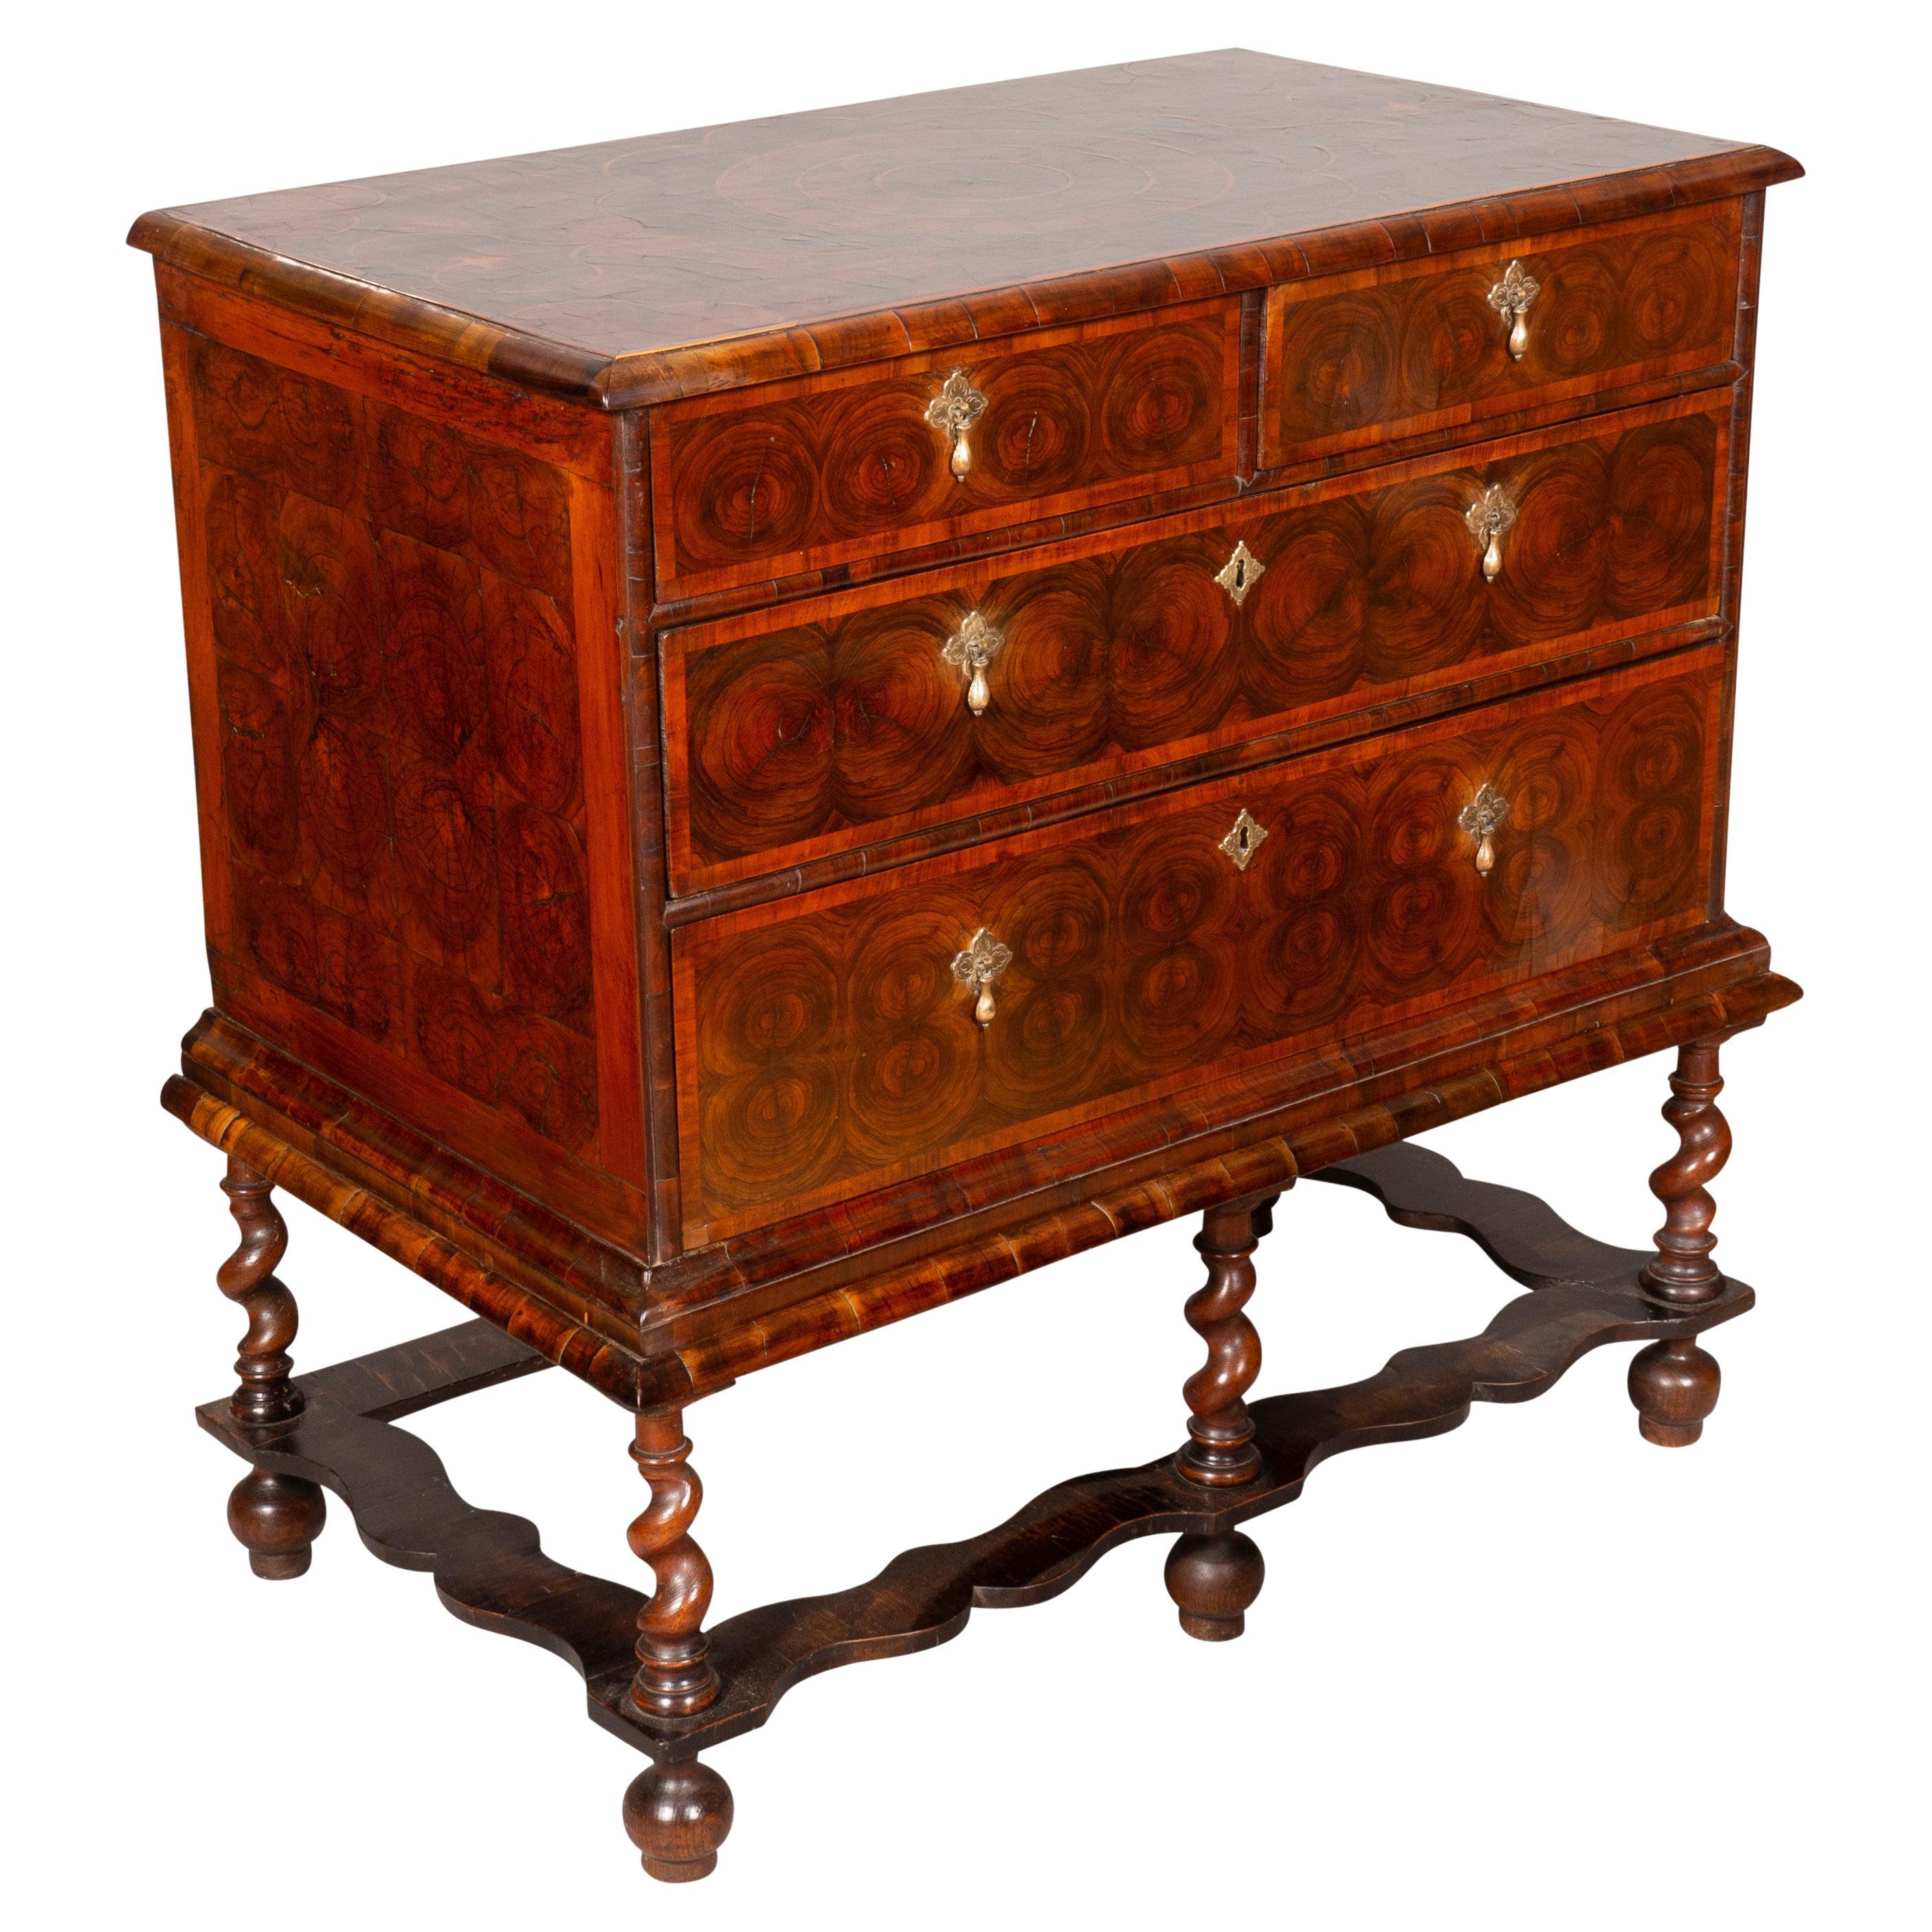 With an elaborately inlaid top with wonderful oyster decoration over two short over two long drawers, raised on a separate barley twist base. With overall oyster veneers. Bun feet likely replaced at some point.